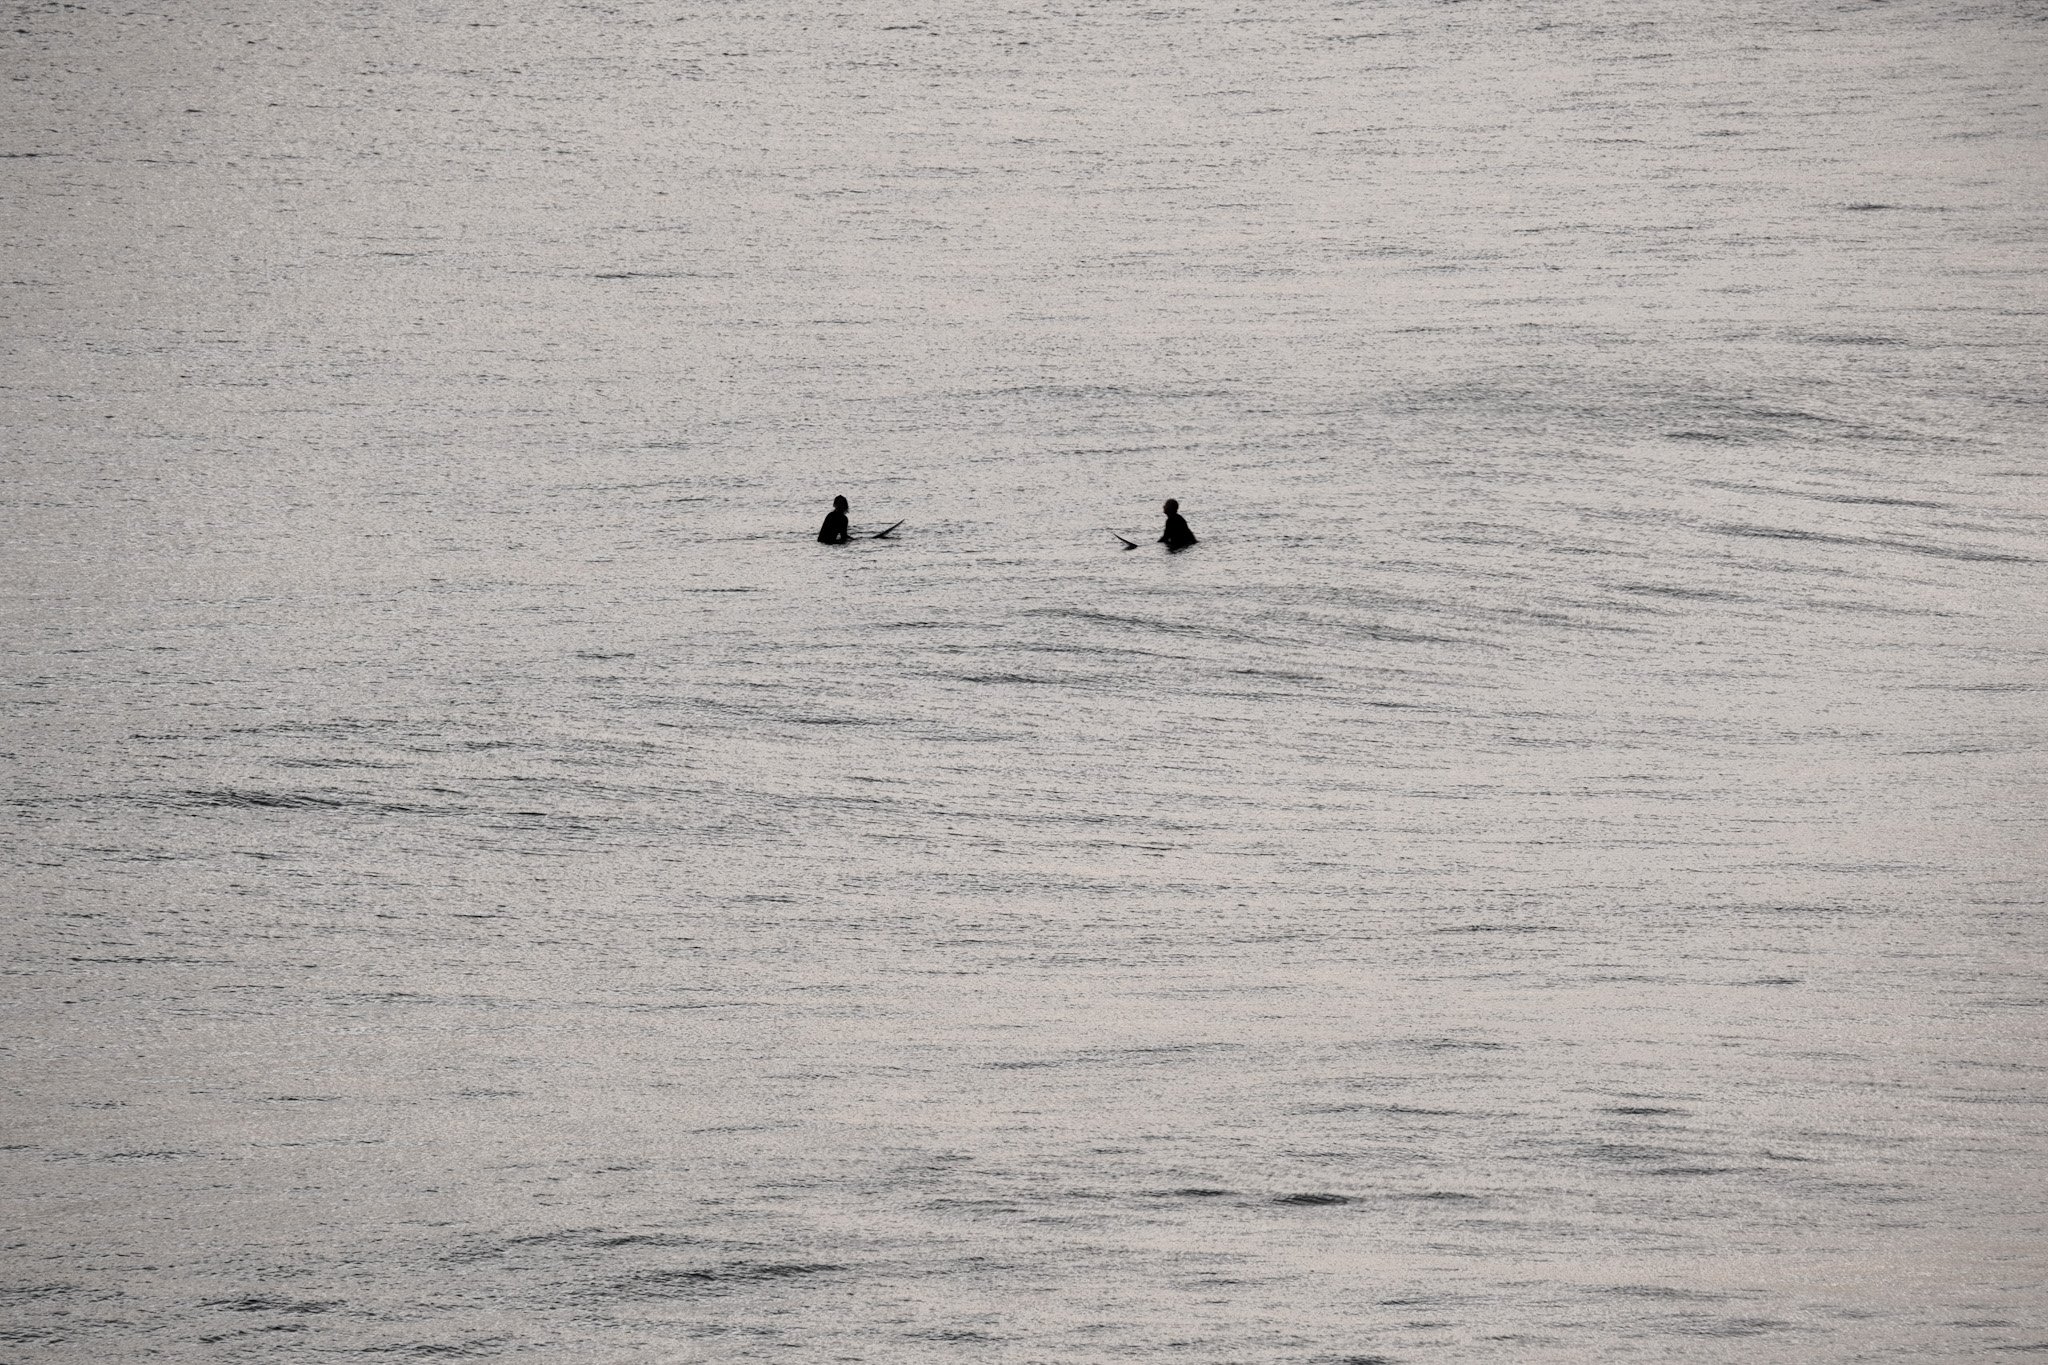 Two surfers silhouette in water at Mount Main Beach in New Zealand